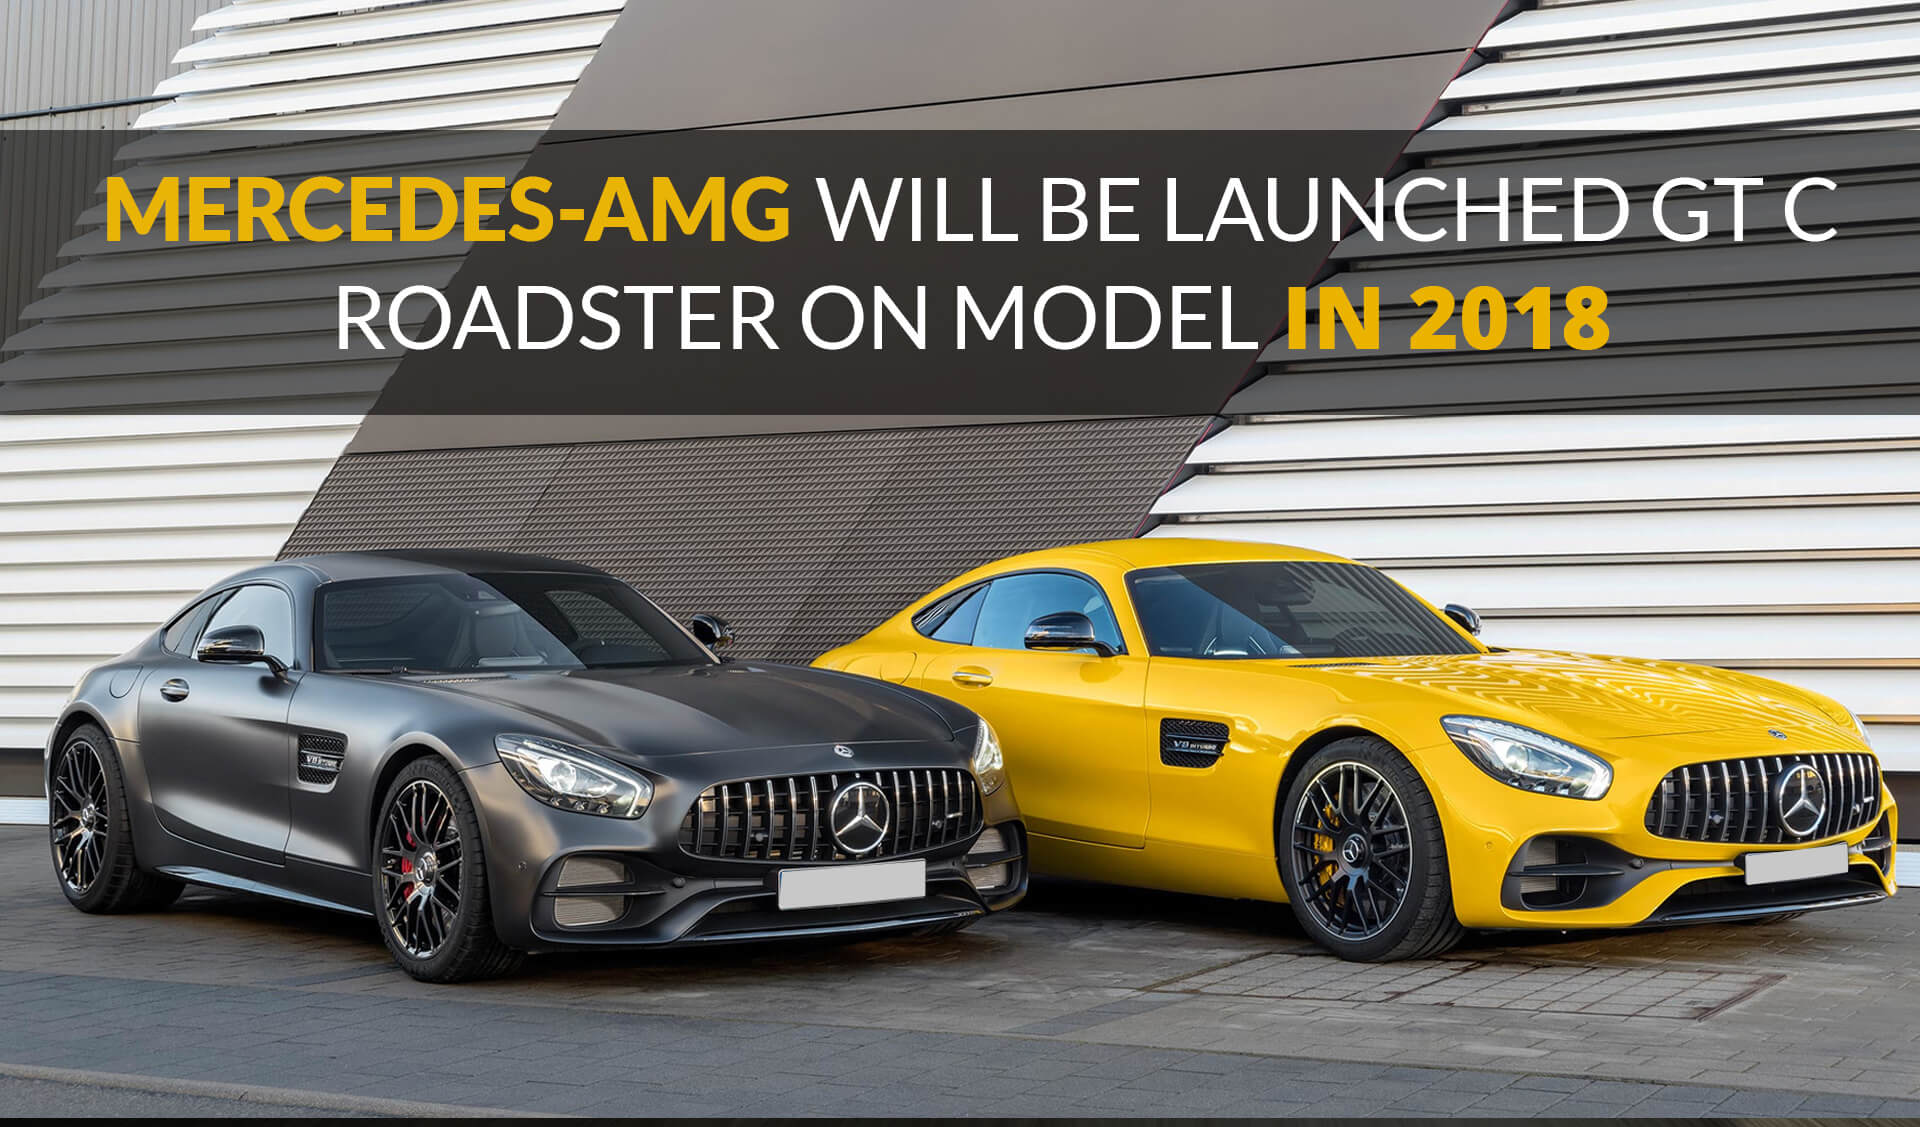 Mercedes-AMG Will Be Launched GT C Roadster Model In 2018